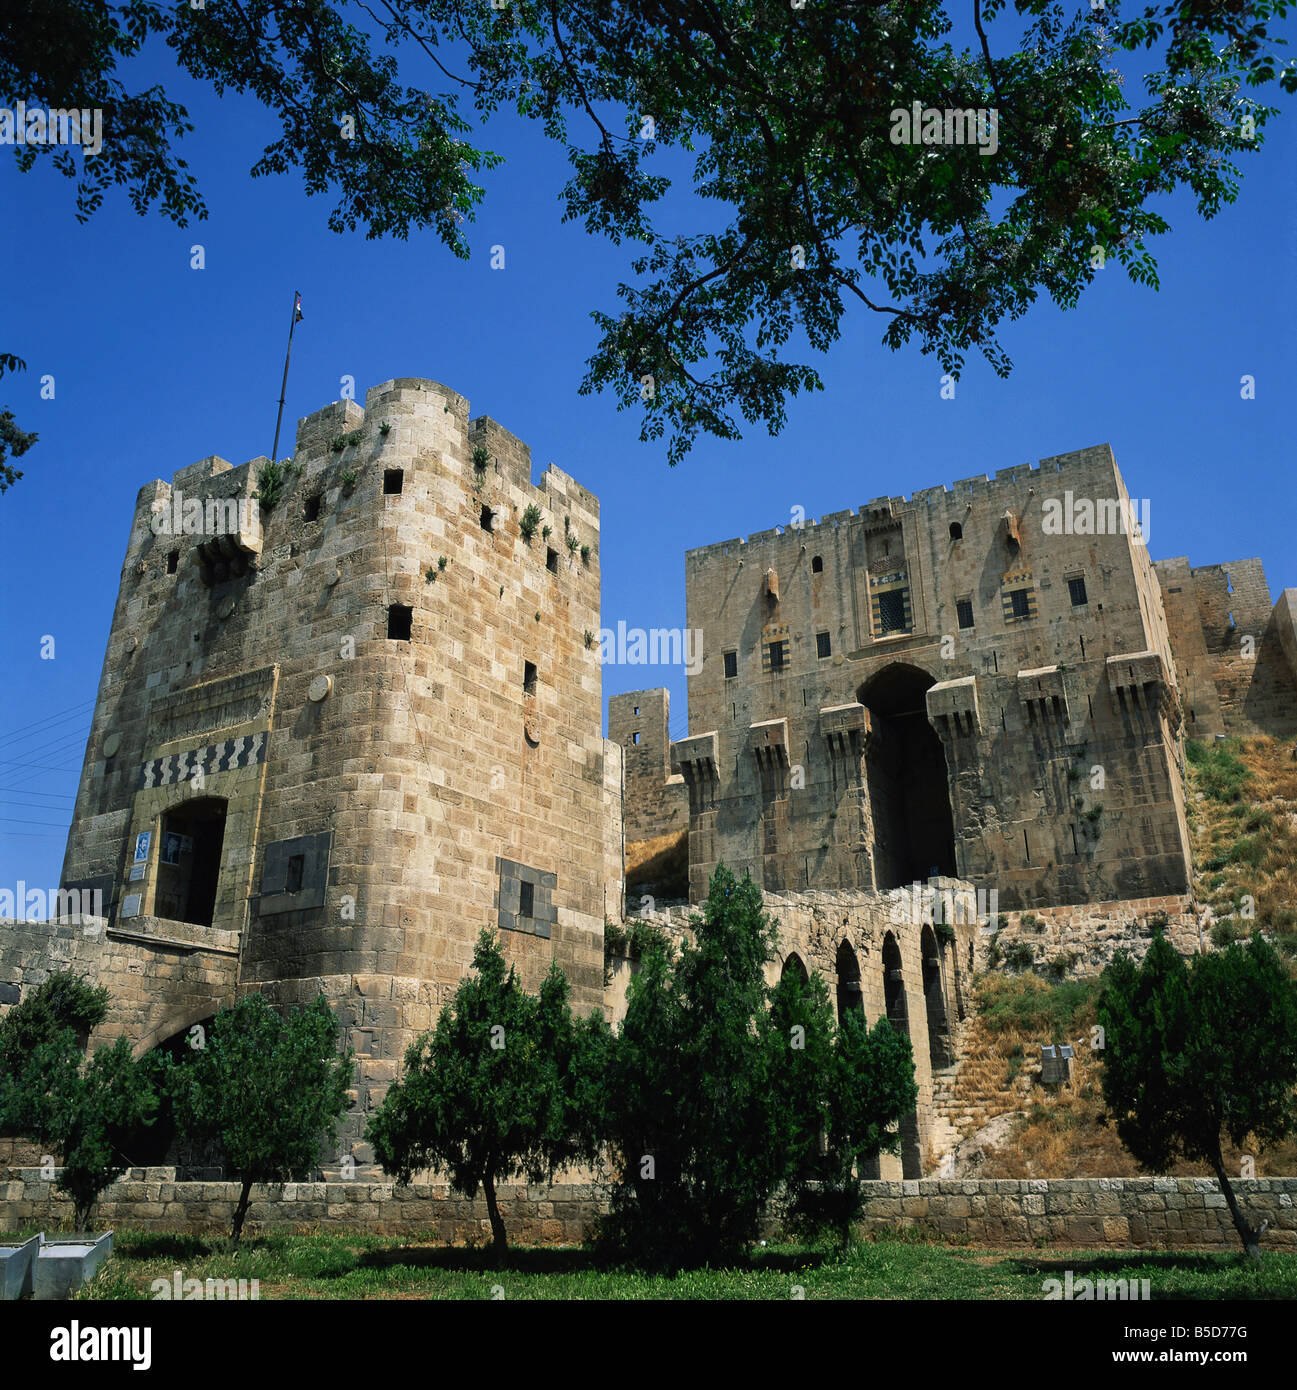 The Monumental Gateway to the Arab Citadel built 1260 Aleppo Syria Middle East C Rennie Stock Photo